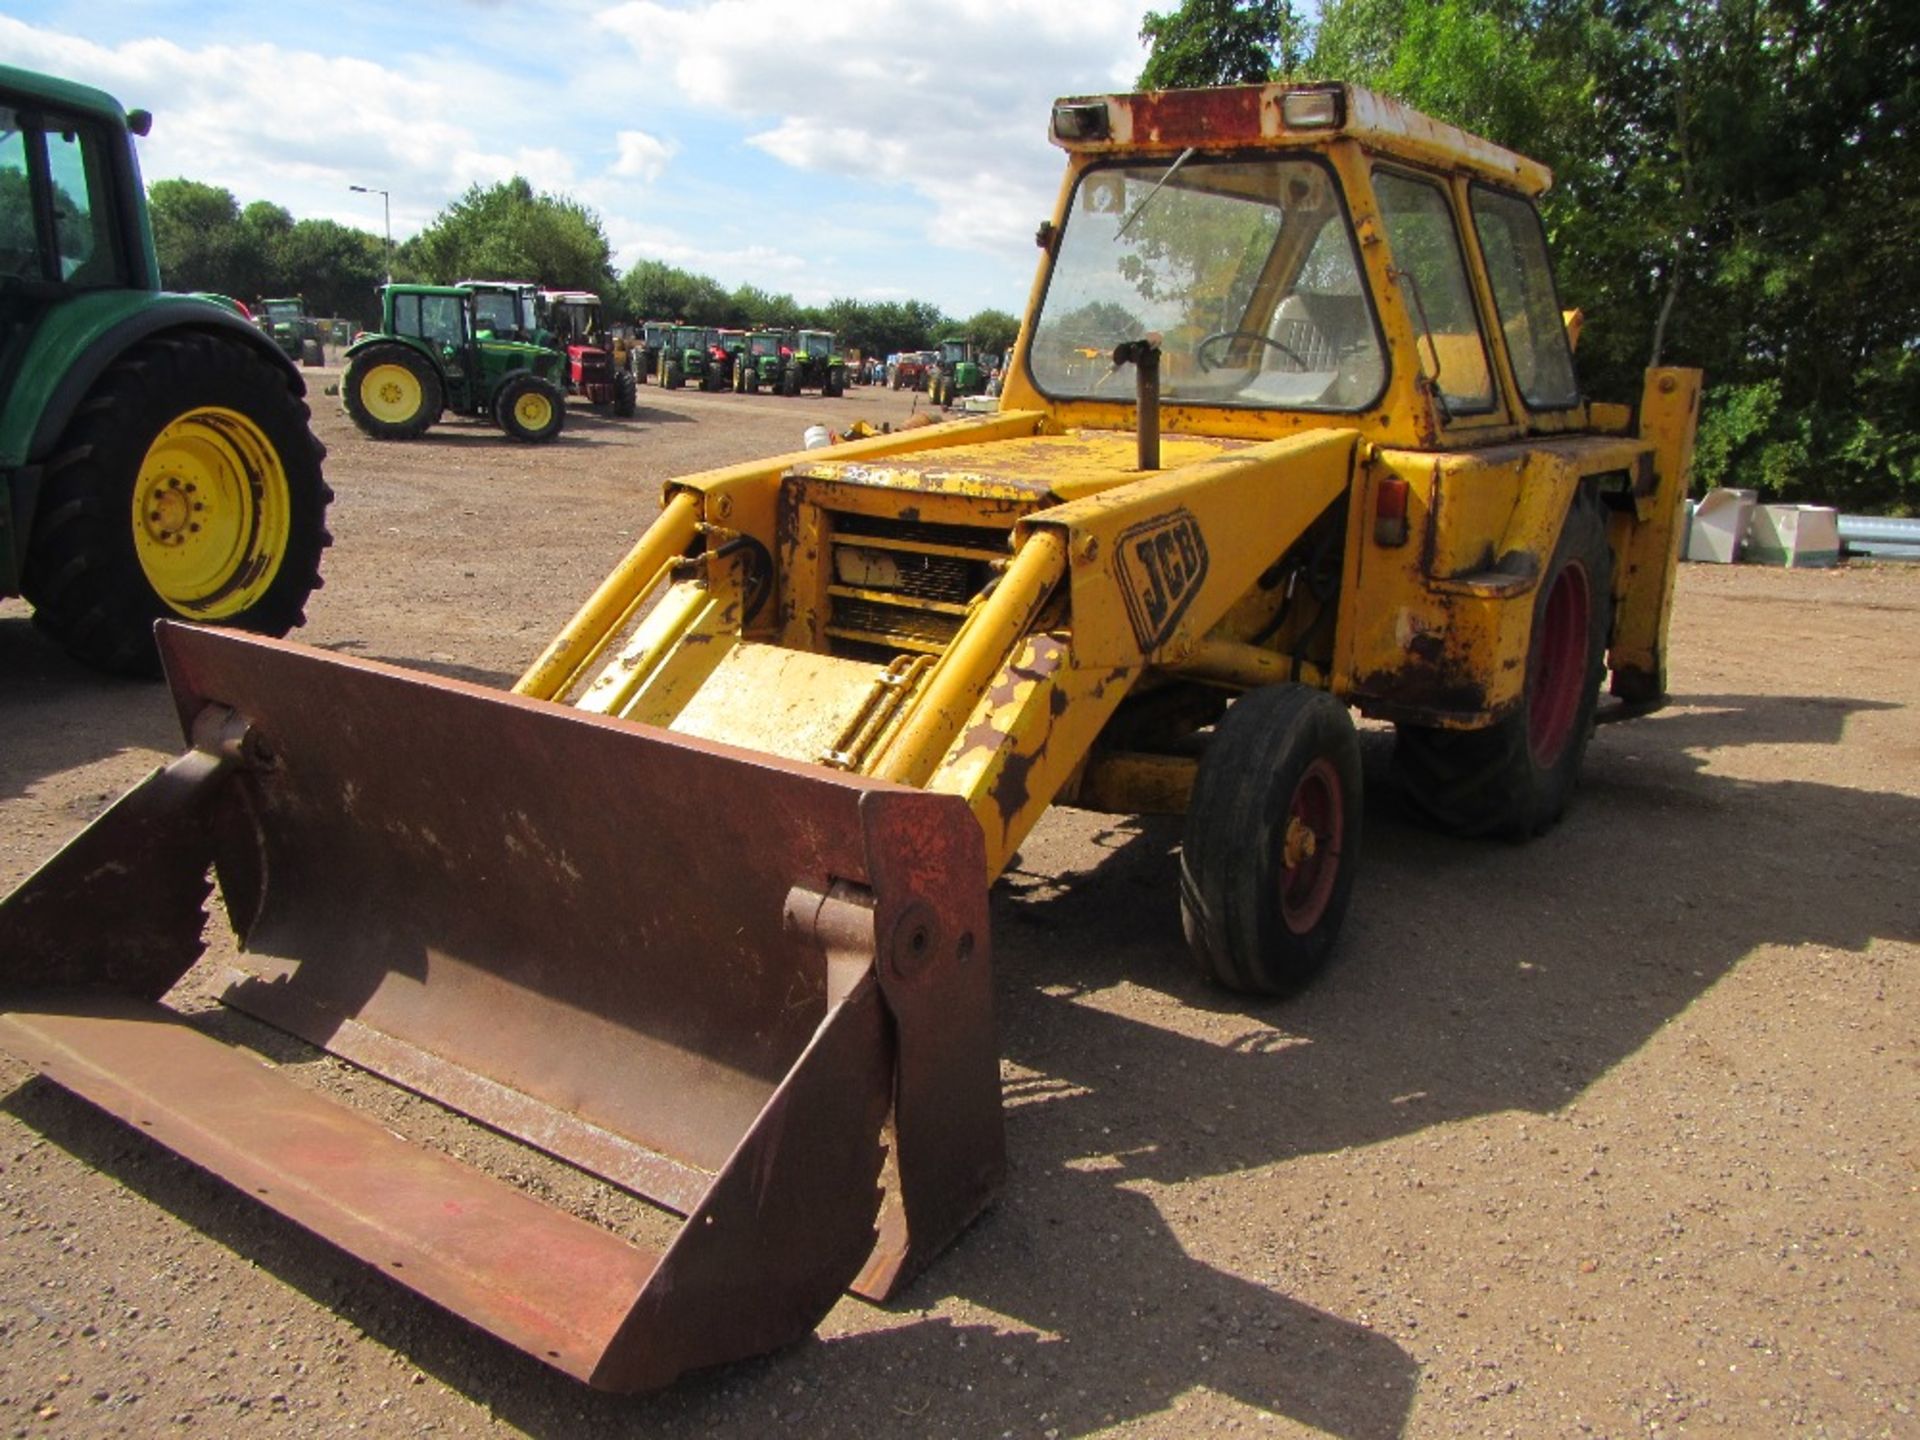 JCB 2C Digger with 4 in 1 & Ditching Bucket. V5 will be supplied. Reg. No. FFL 790L Ser No 3C53474